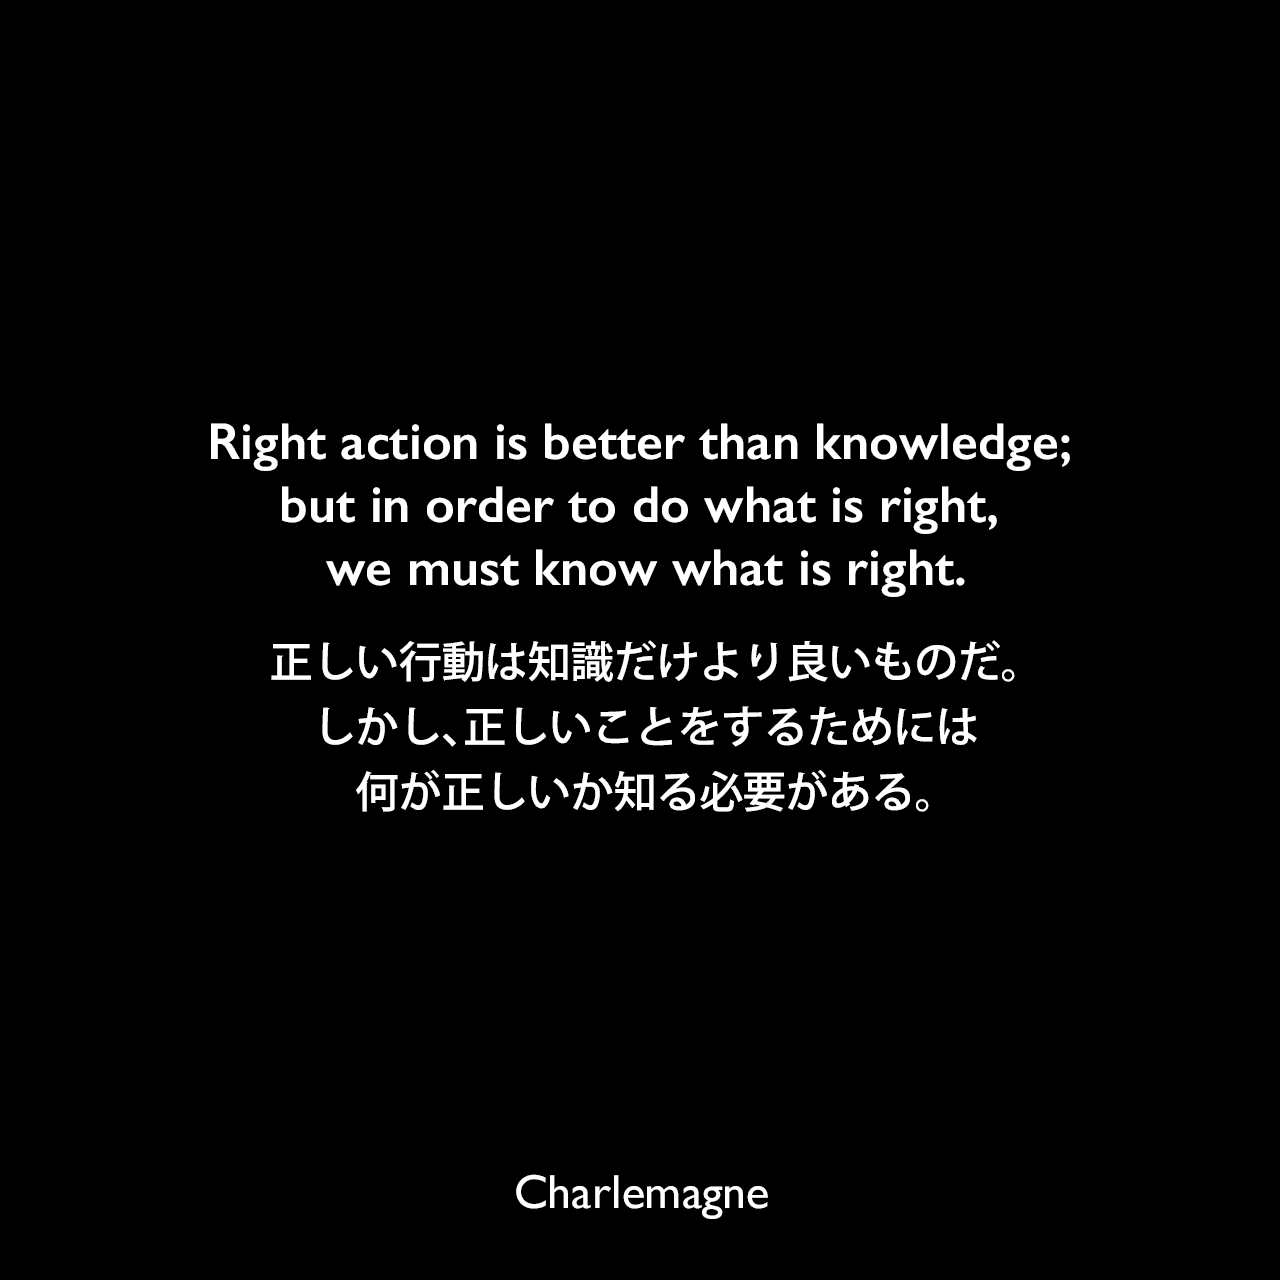 Right action is better than knowledge; but in order to do what is right, we must know what is right.正しい行動は知識だけより良いものだ。しかし、正しいことをするためには、何が正しいか知る必要がある。Charlemagne